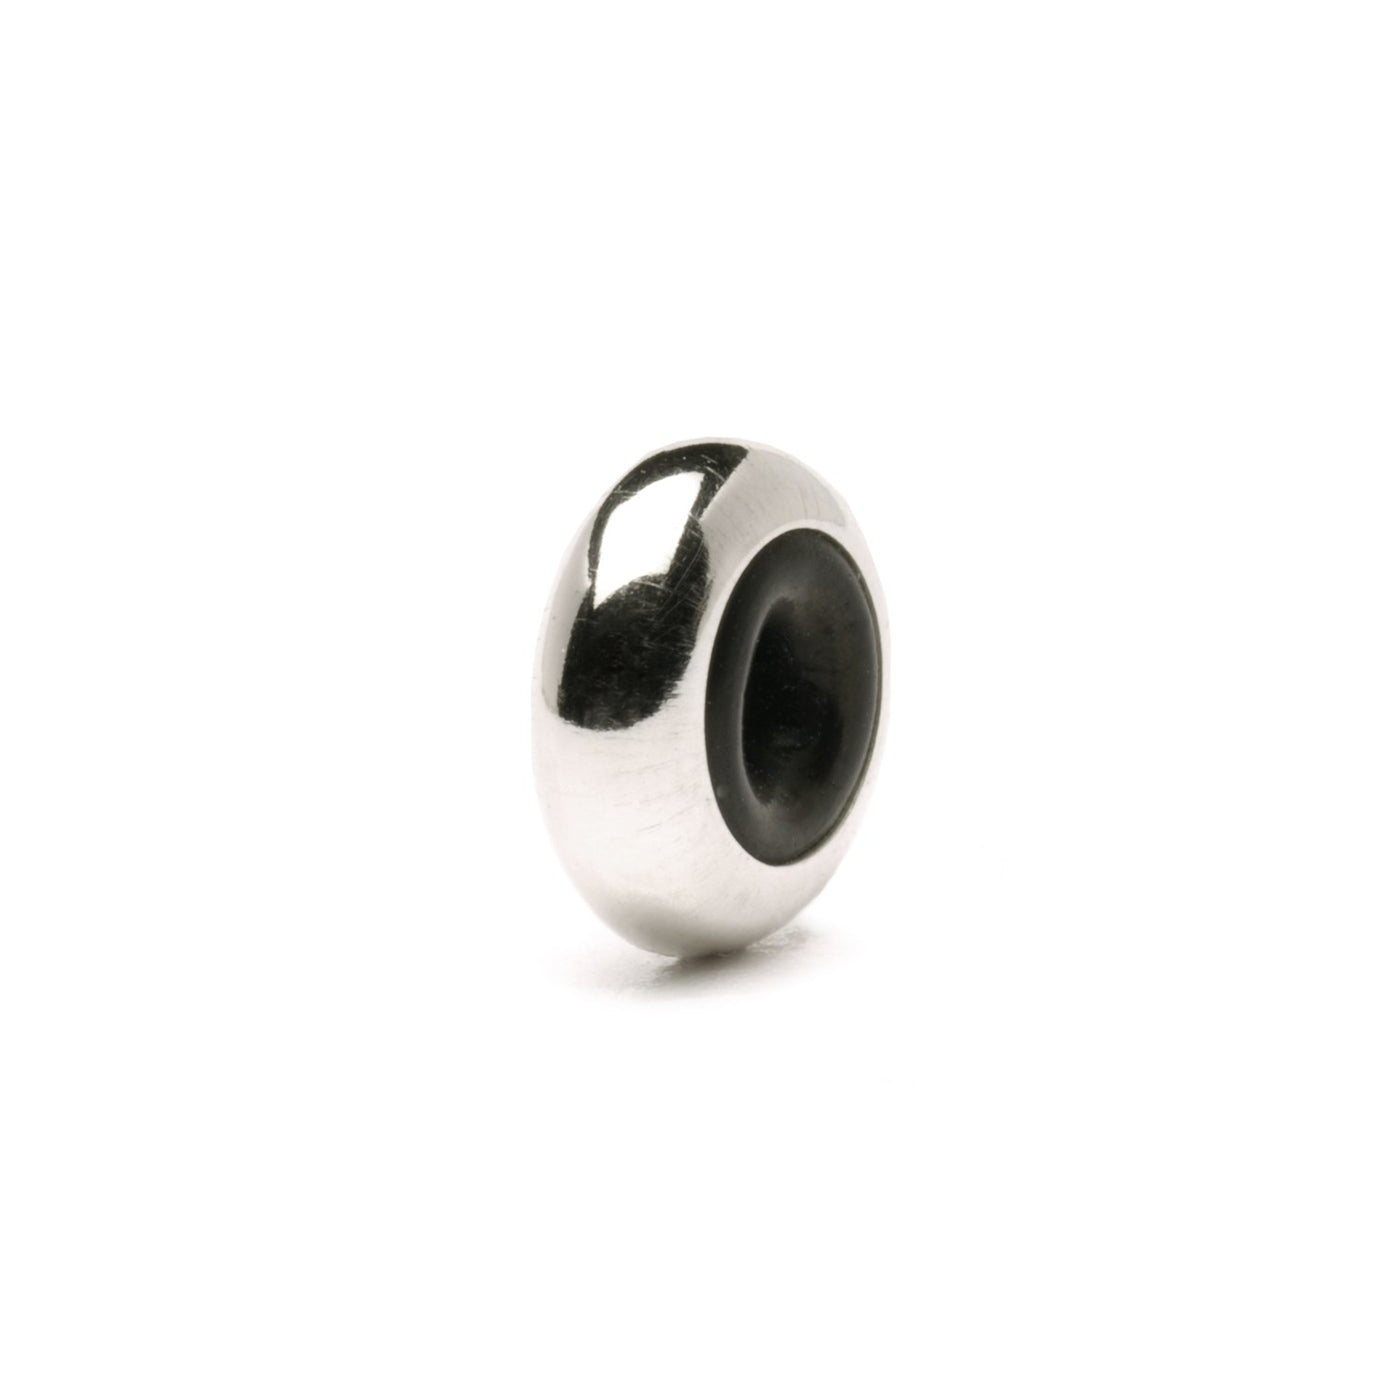 Single silver spacer with black rubber inside that prevents beads from rolling on your bracelet. A simple and elegant addition to your Trollbeads.